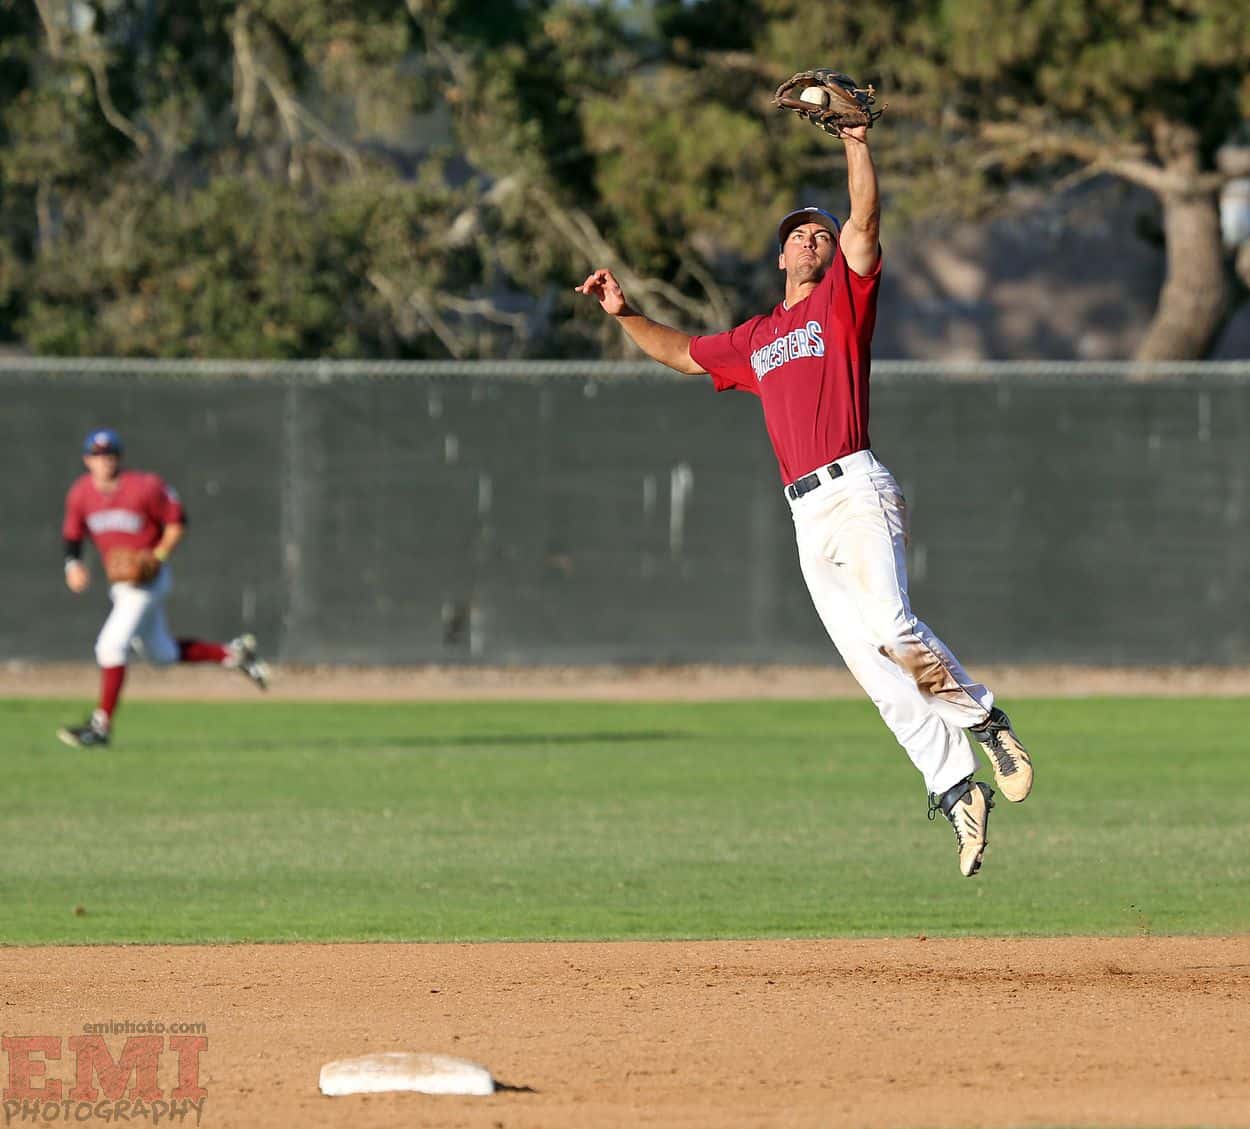 Player jumping to catch ball